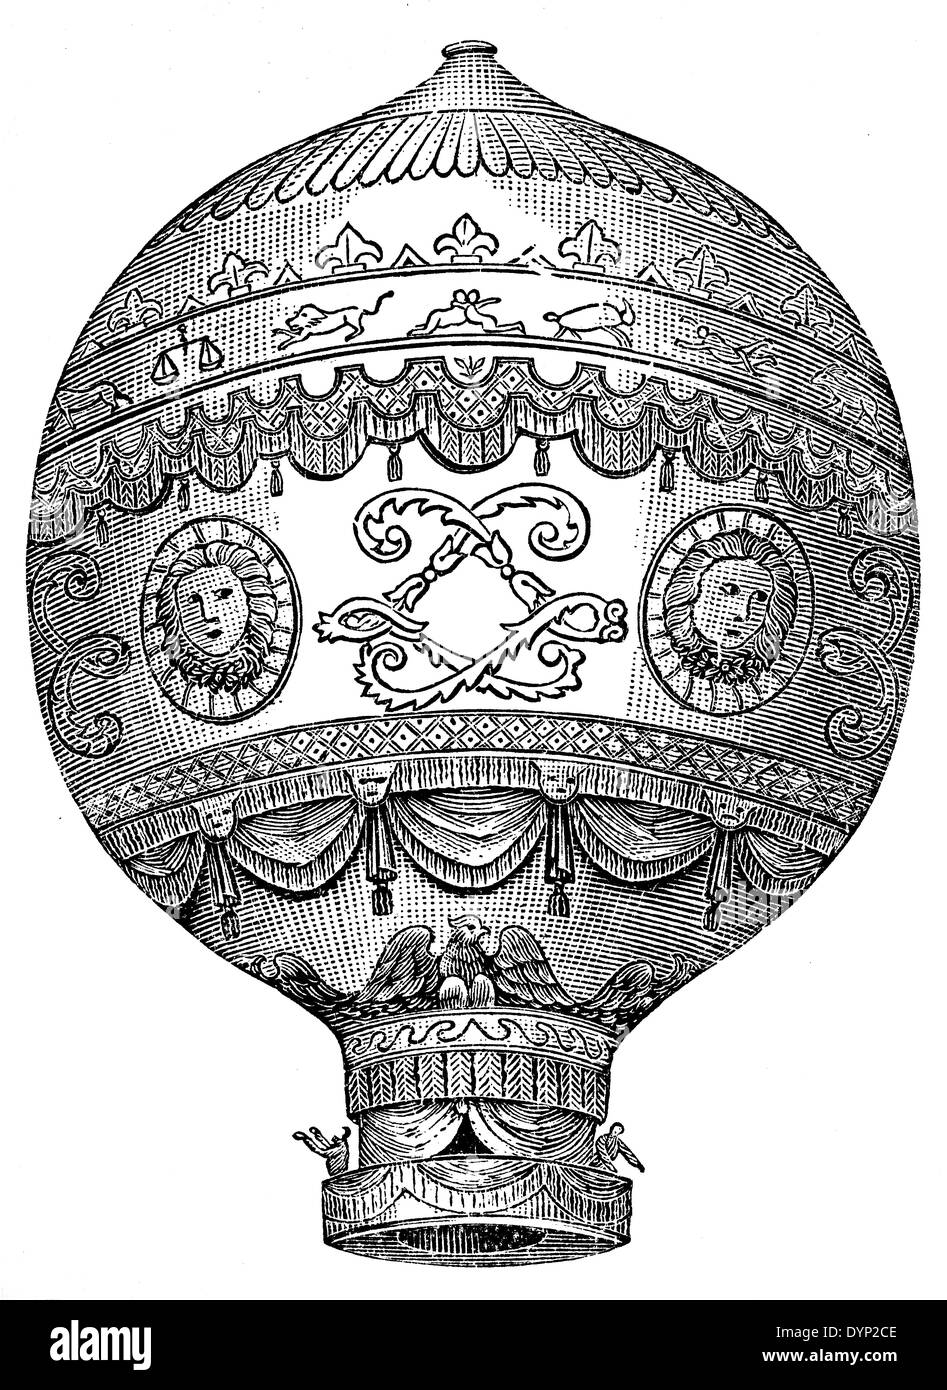 First untethered balloon flight, by Rozier and the Marquis d'Arlandes (21 November 1783) Stock Photo